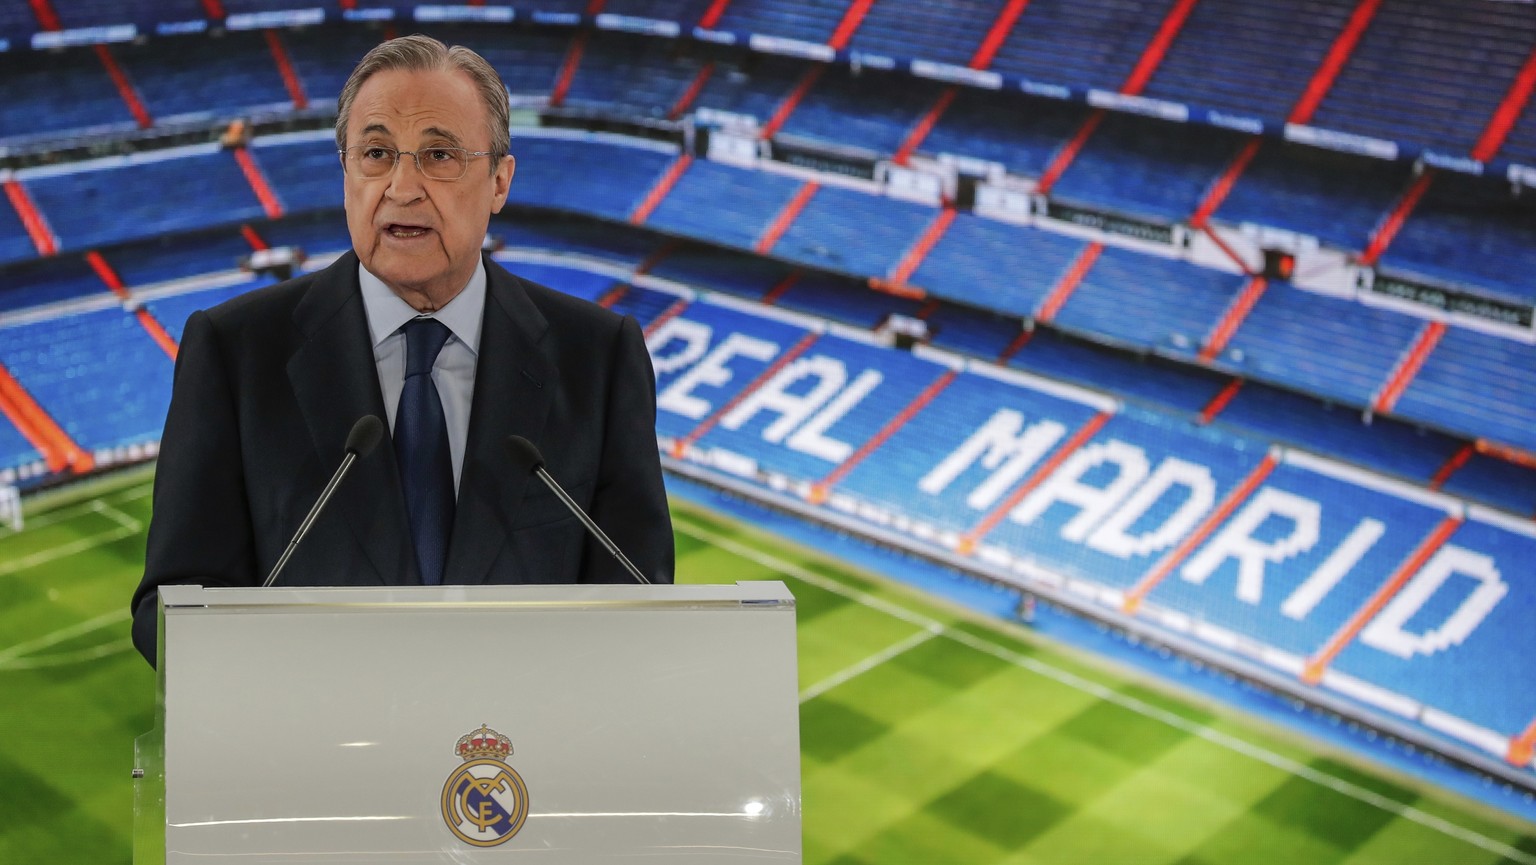 FILE - In this June 13, 2019 file photo, Real Madrid&#039;s President Florentino Perez gives a speech at the Santiago Bernabeu stadium in Madrid, Spain. The Super League&#039;s founding chairman Flore ...